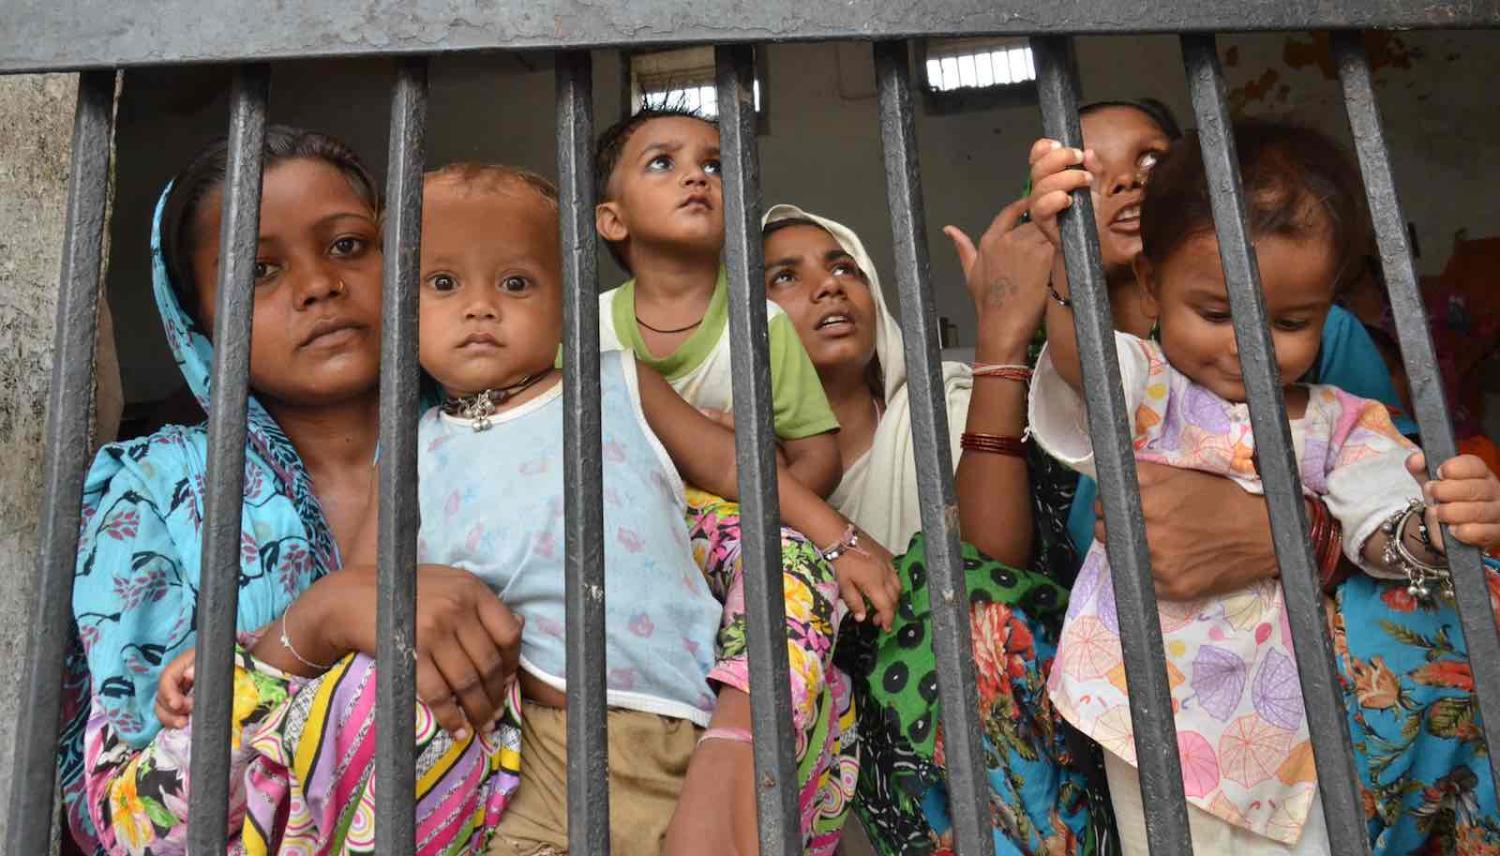 Women inmates bringing up their children behind bars in Amritsar, India, 2014 (Photo: Sameer Sehgal via Getty)